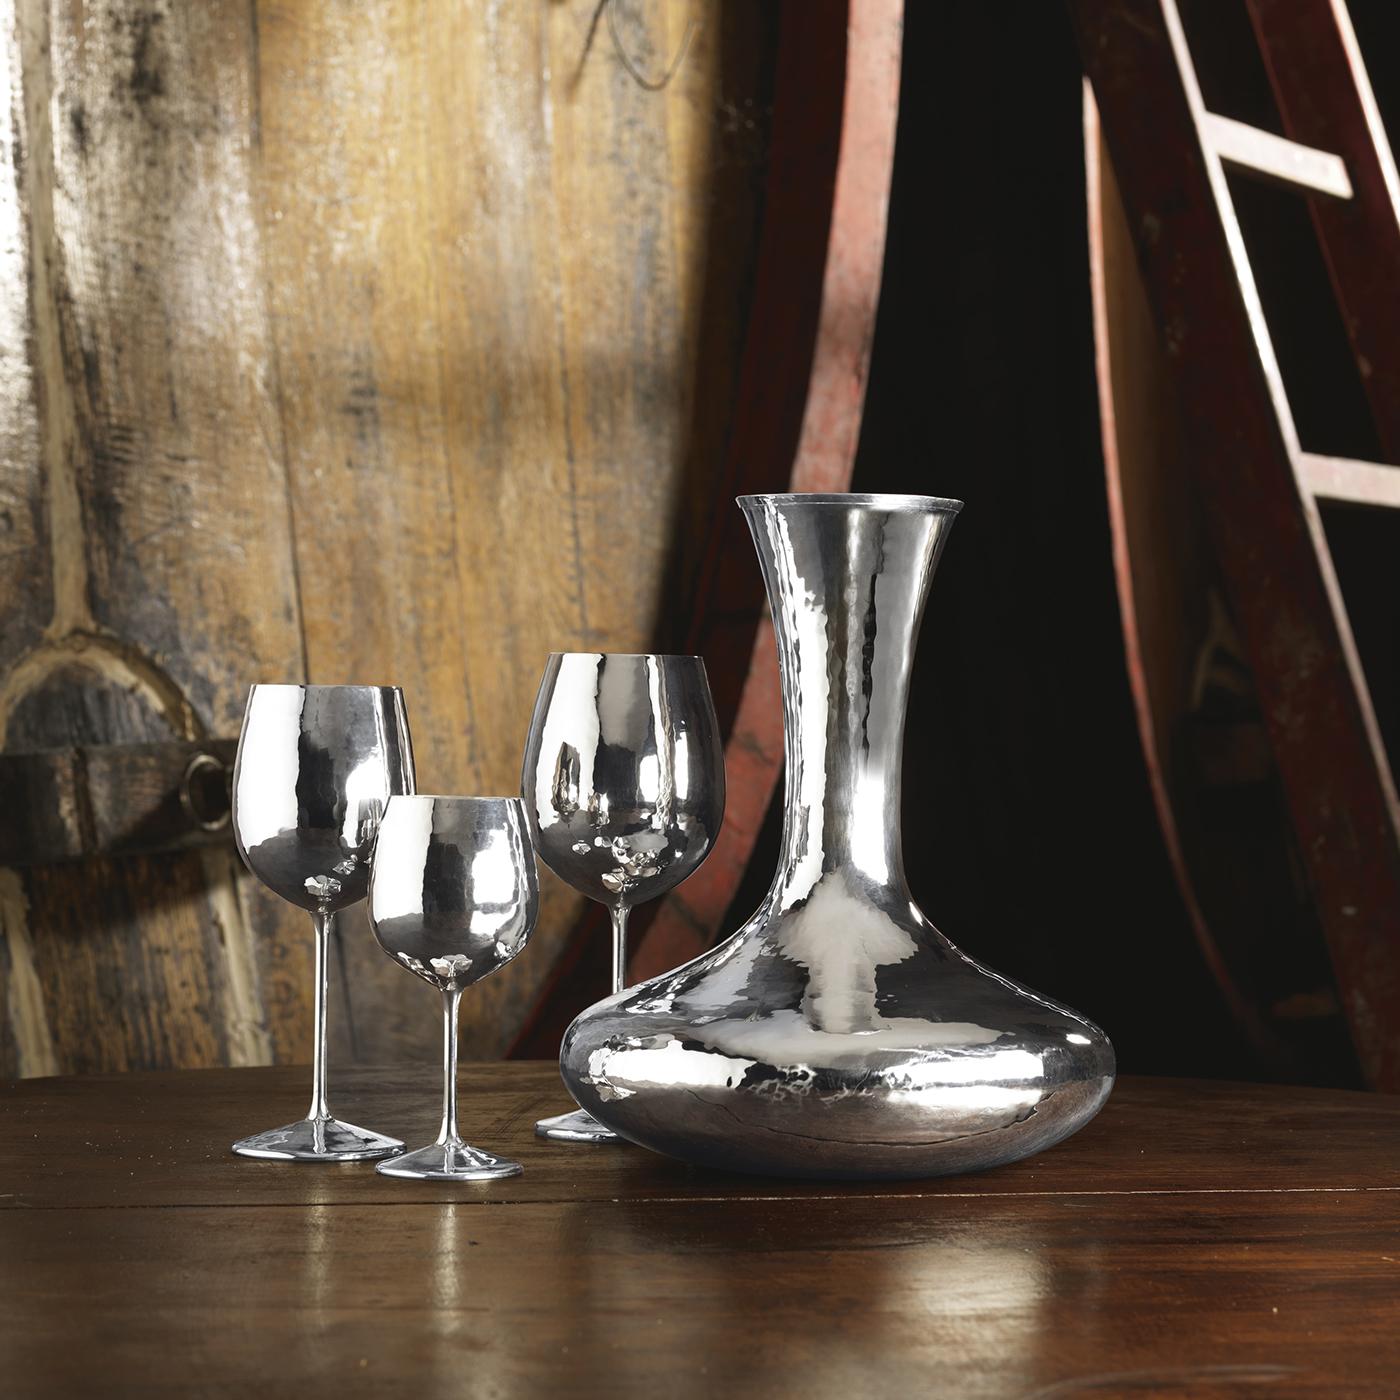 This unique and elegantly stylish Taste 2 Wine Glass is crafted in silver, offering properties that enhance the scent and flavors, while maintaining the fine quality and taste, of the beverage inside. Bringing elegance to the table with simple forms